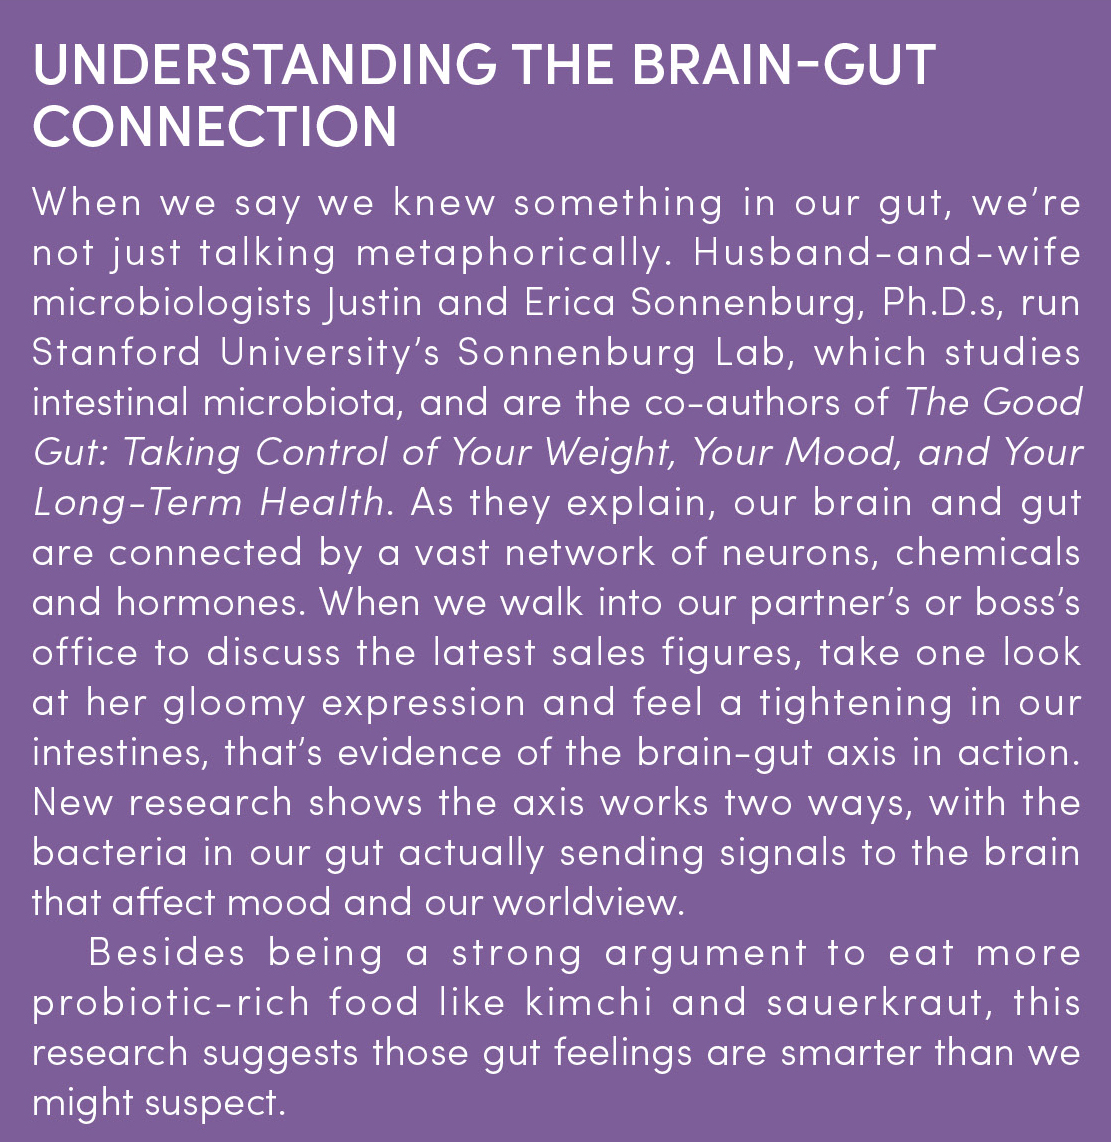 Go With Your Gut: The Science of Instinct